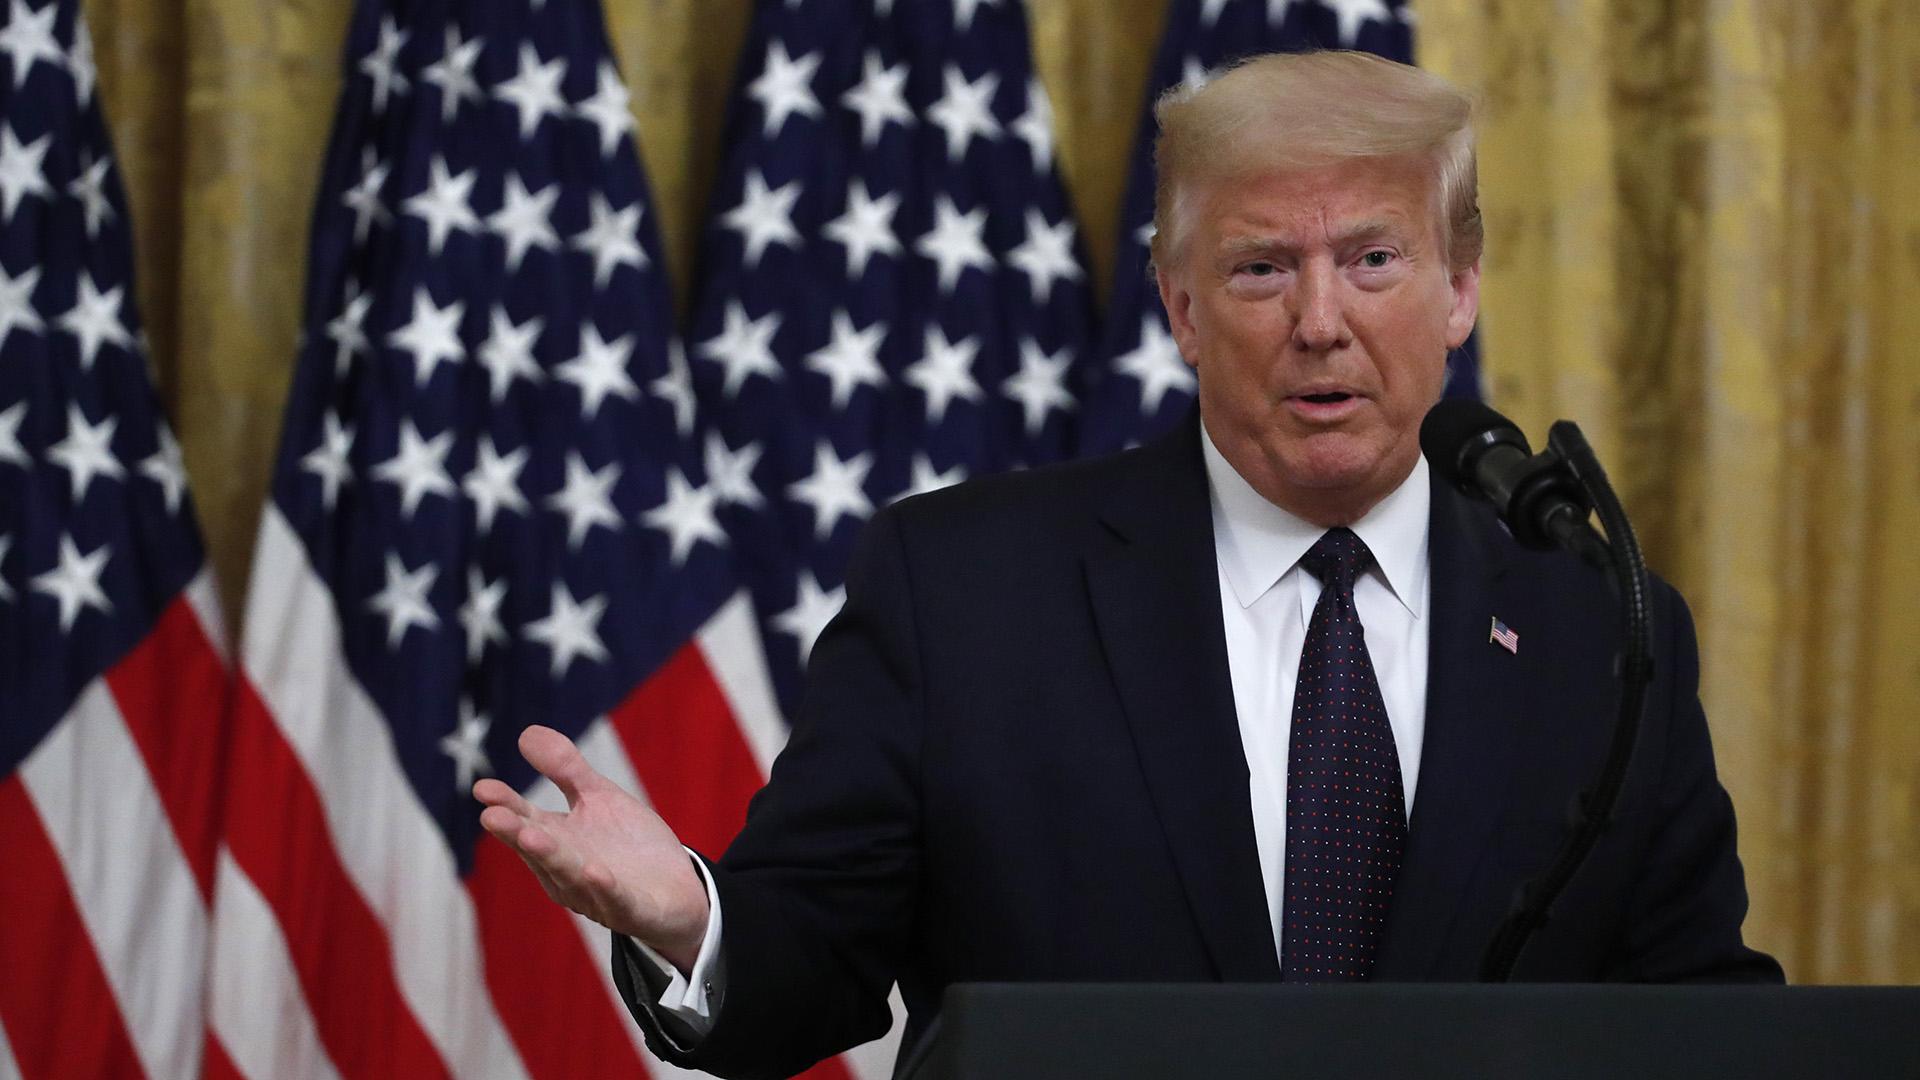 President Donald Trump speaks about the PREVENTS “President’s Roadmap to Empower Veterans and End a National Tragedy of Suicide,” task force, in the East Room of the White House, Wednesday, June 17, 2020, in Washington. (AP Photo / Alex Brandon)